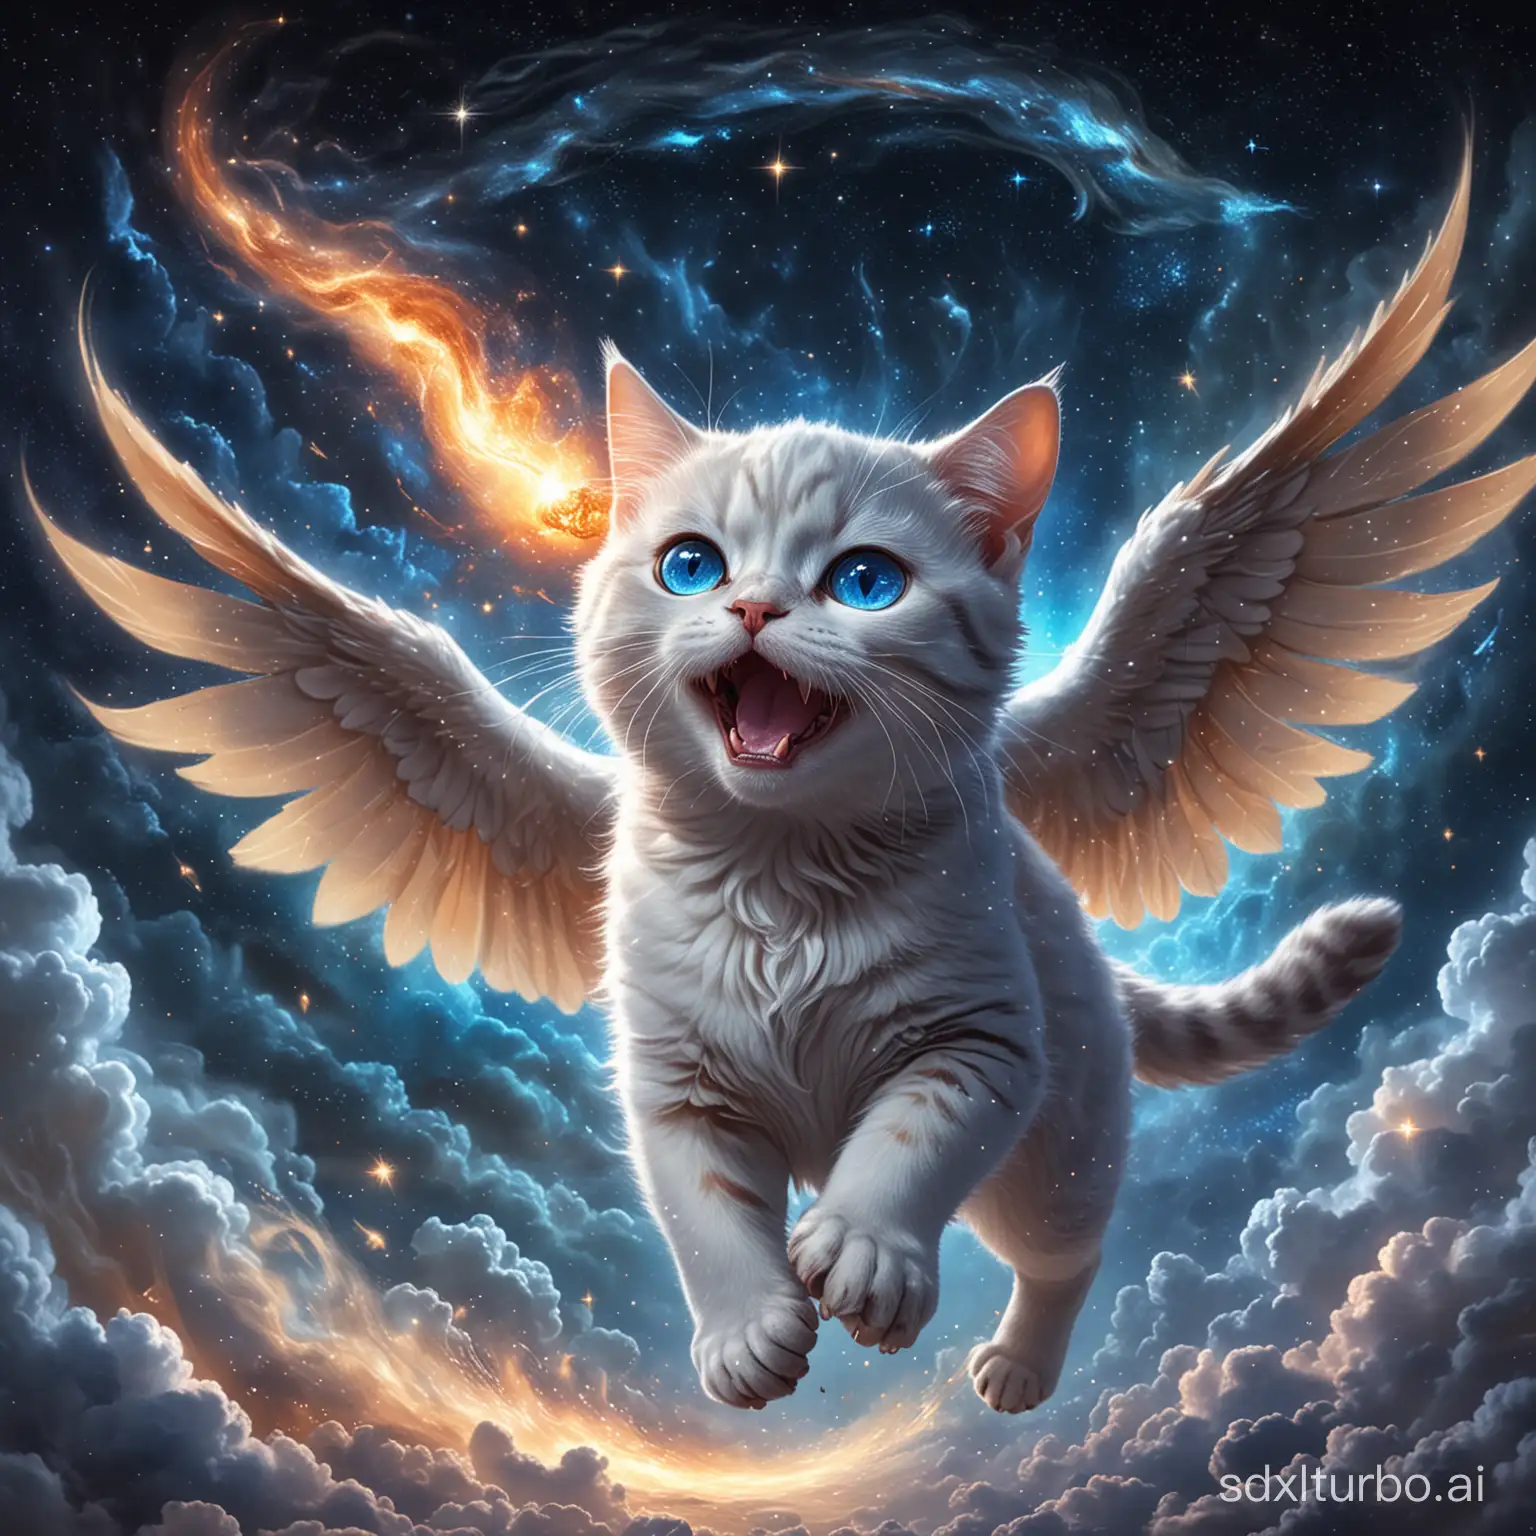 Winged-Cat-Soaring-Through-Starry-Skies-with-Fiery-Breath